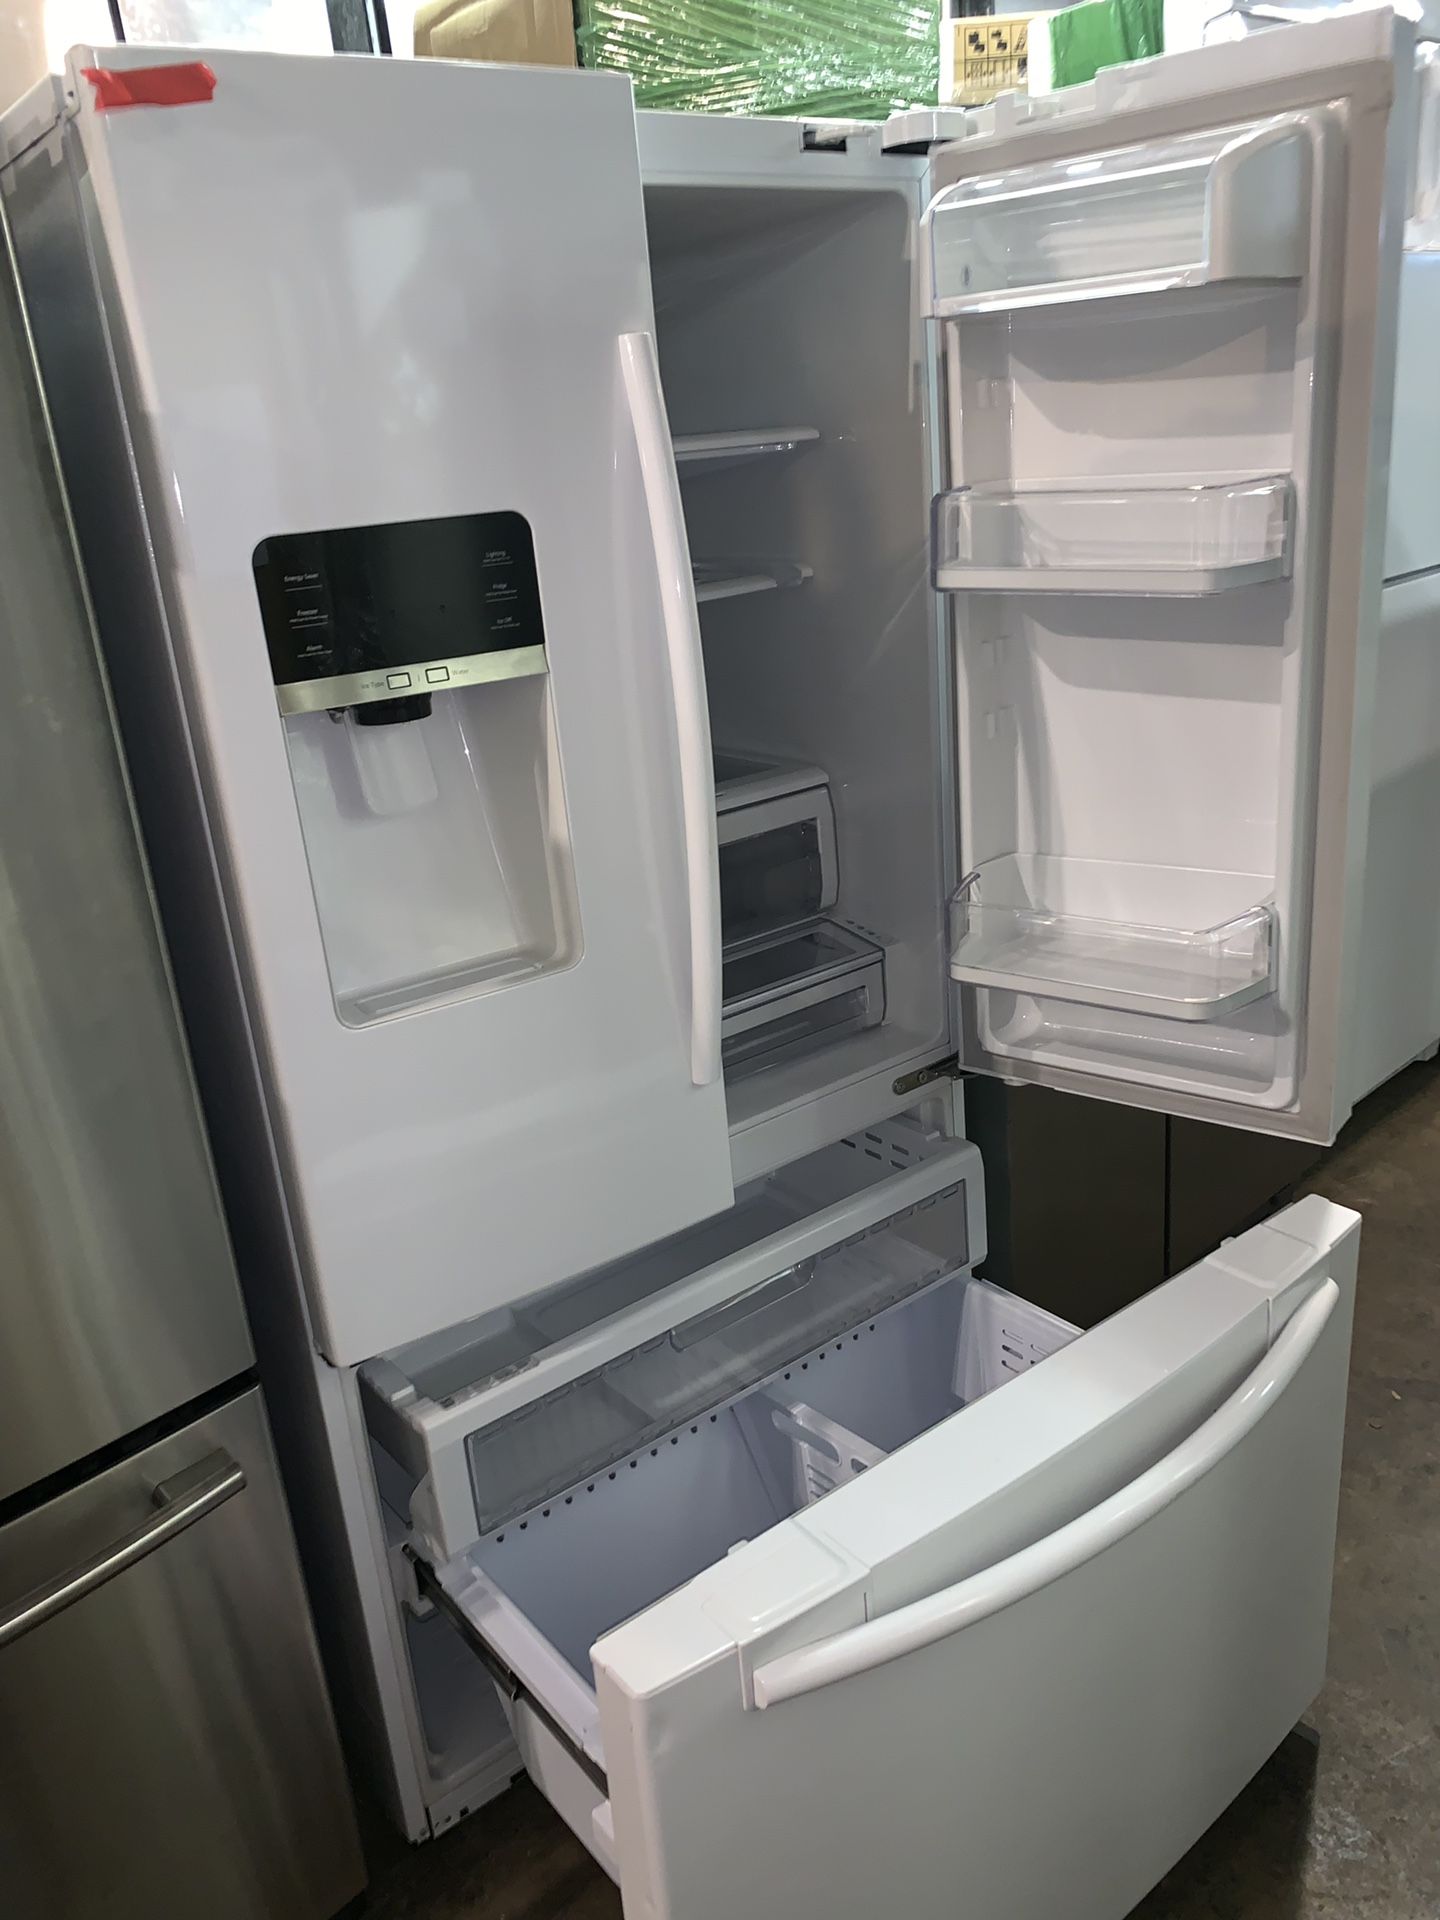 SAMSUNG 36in. French doors refrigerator working perfectly with 4 months warranty